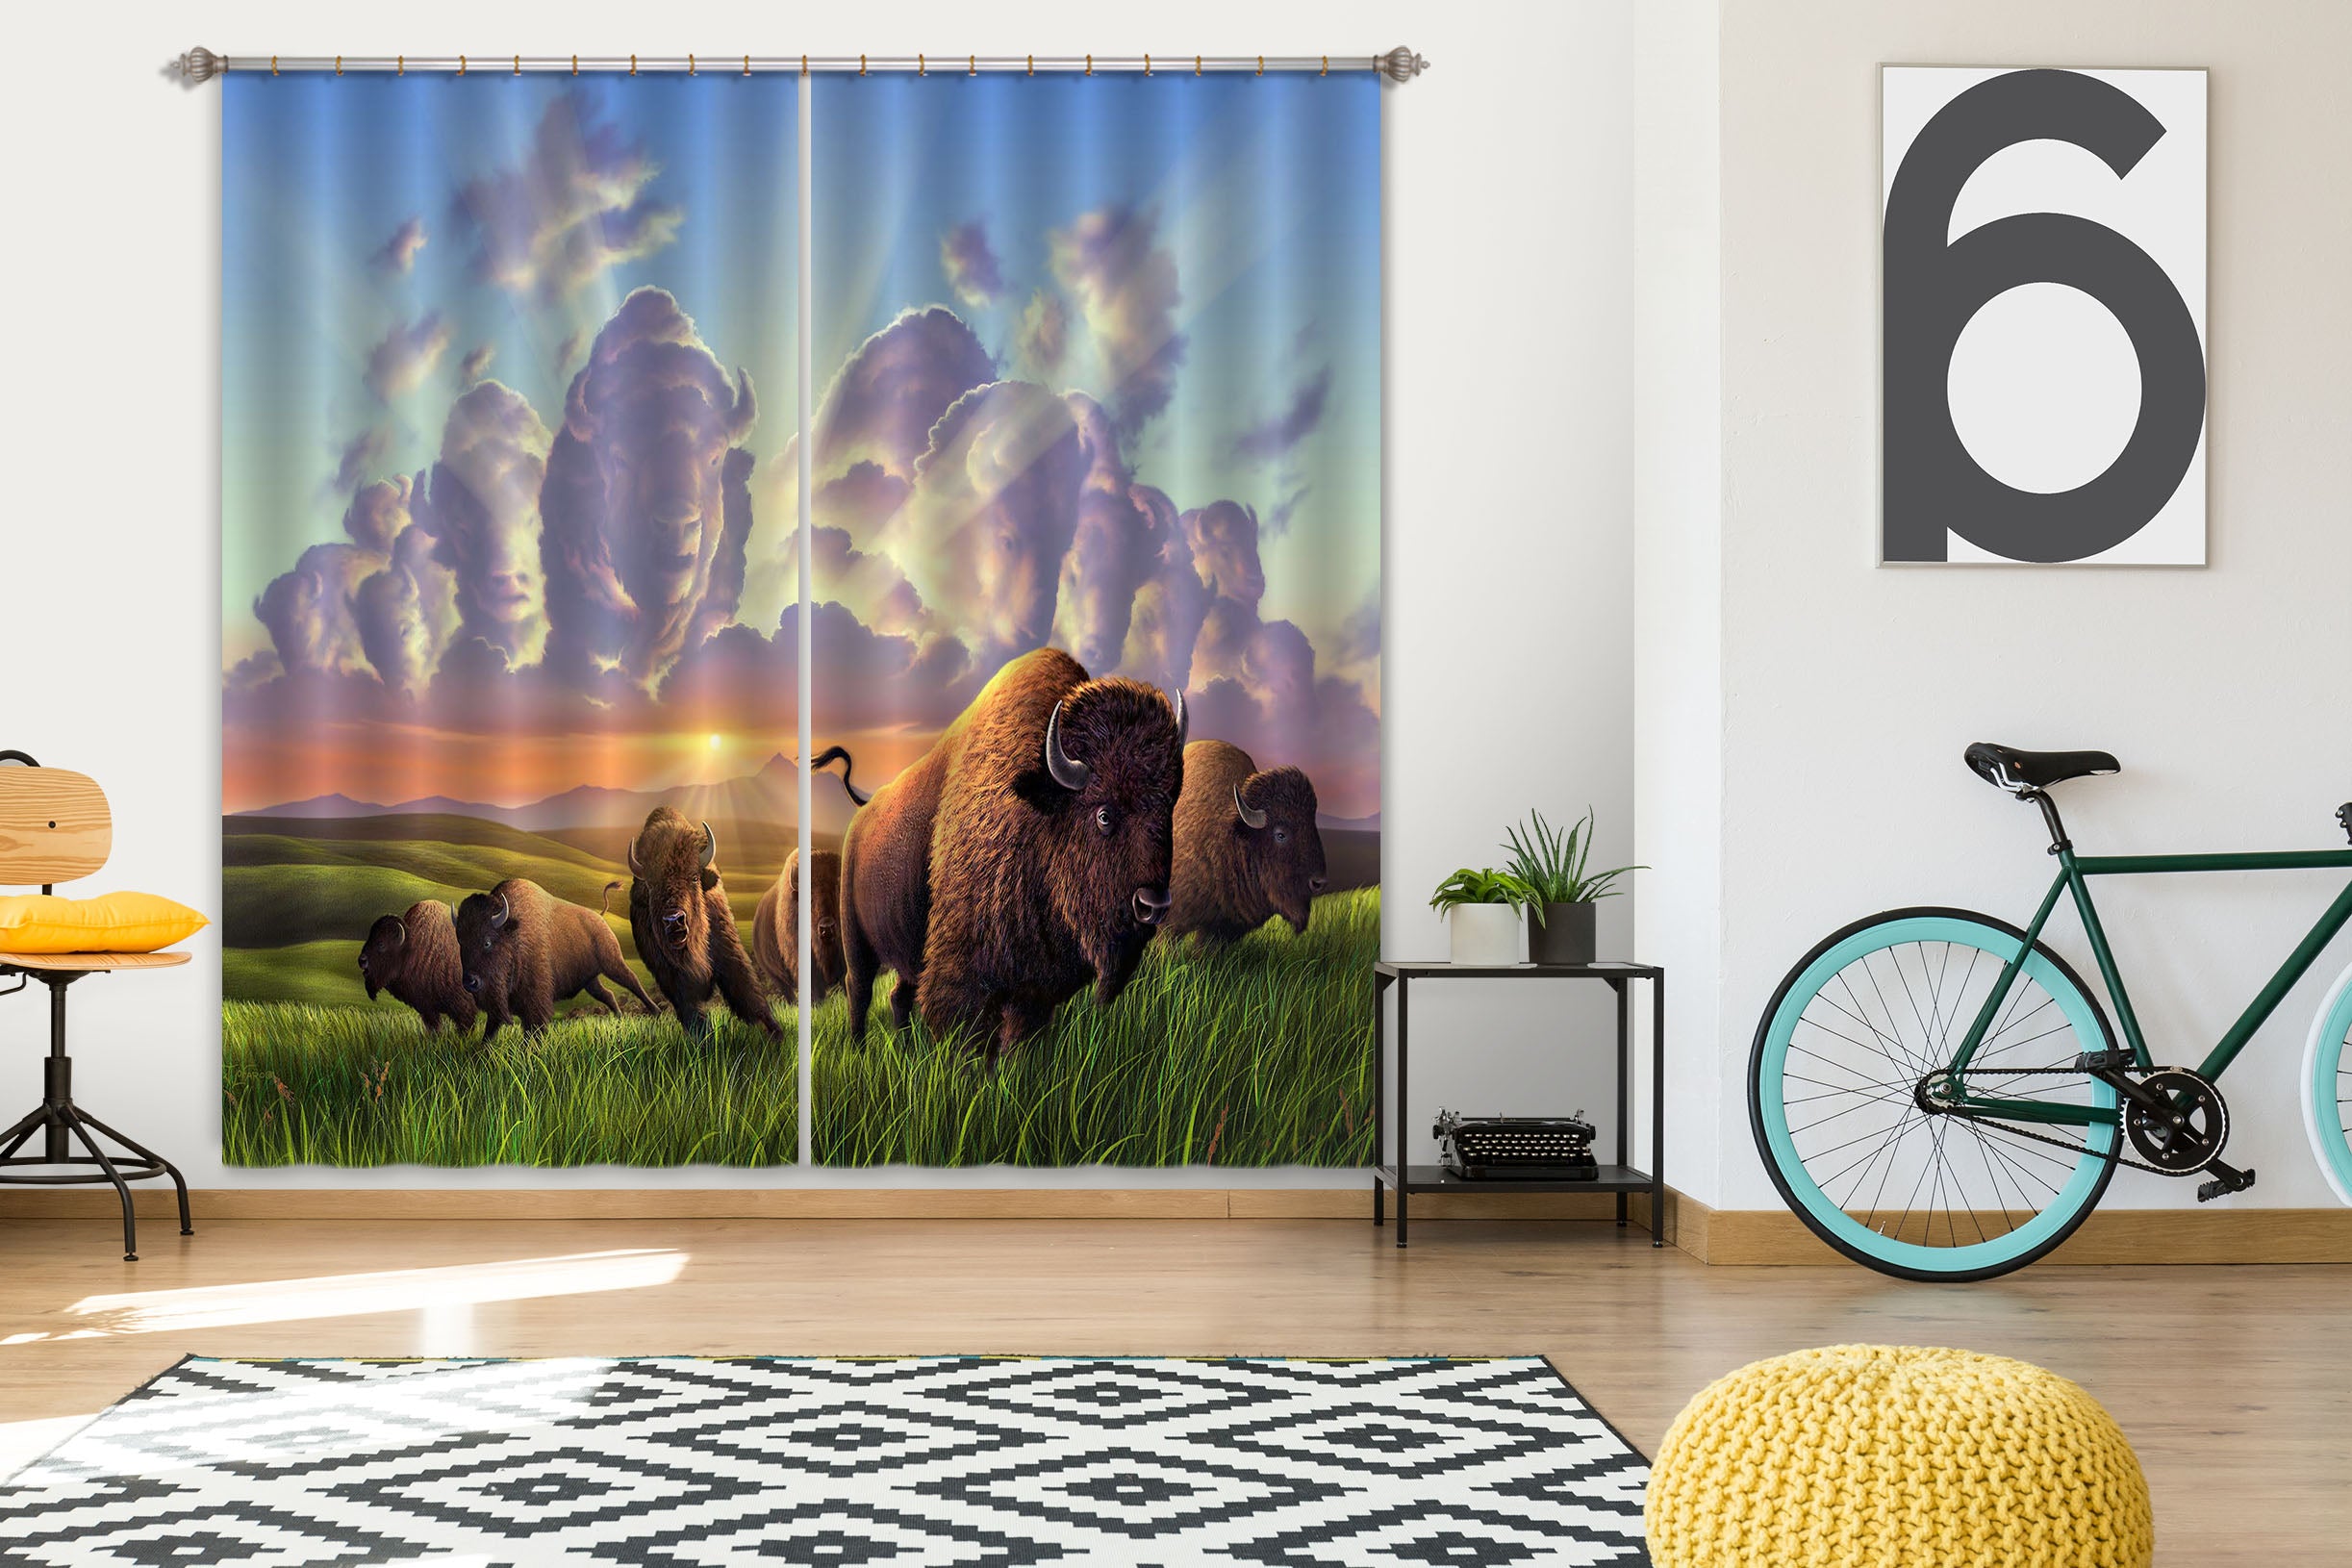 3D Stampede 047 Jerry LoFaro Curtain Curtains Drapes